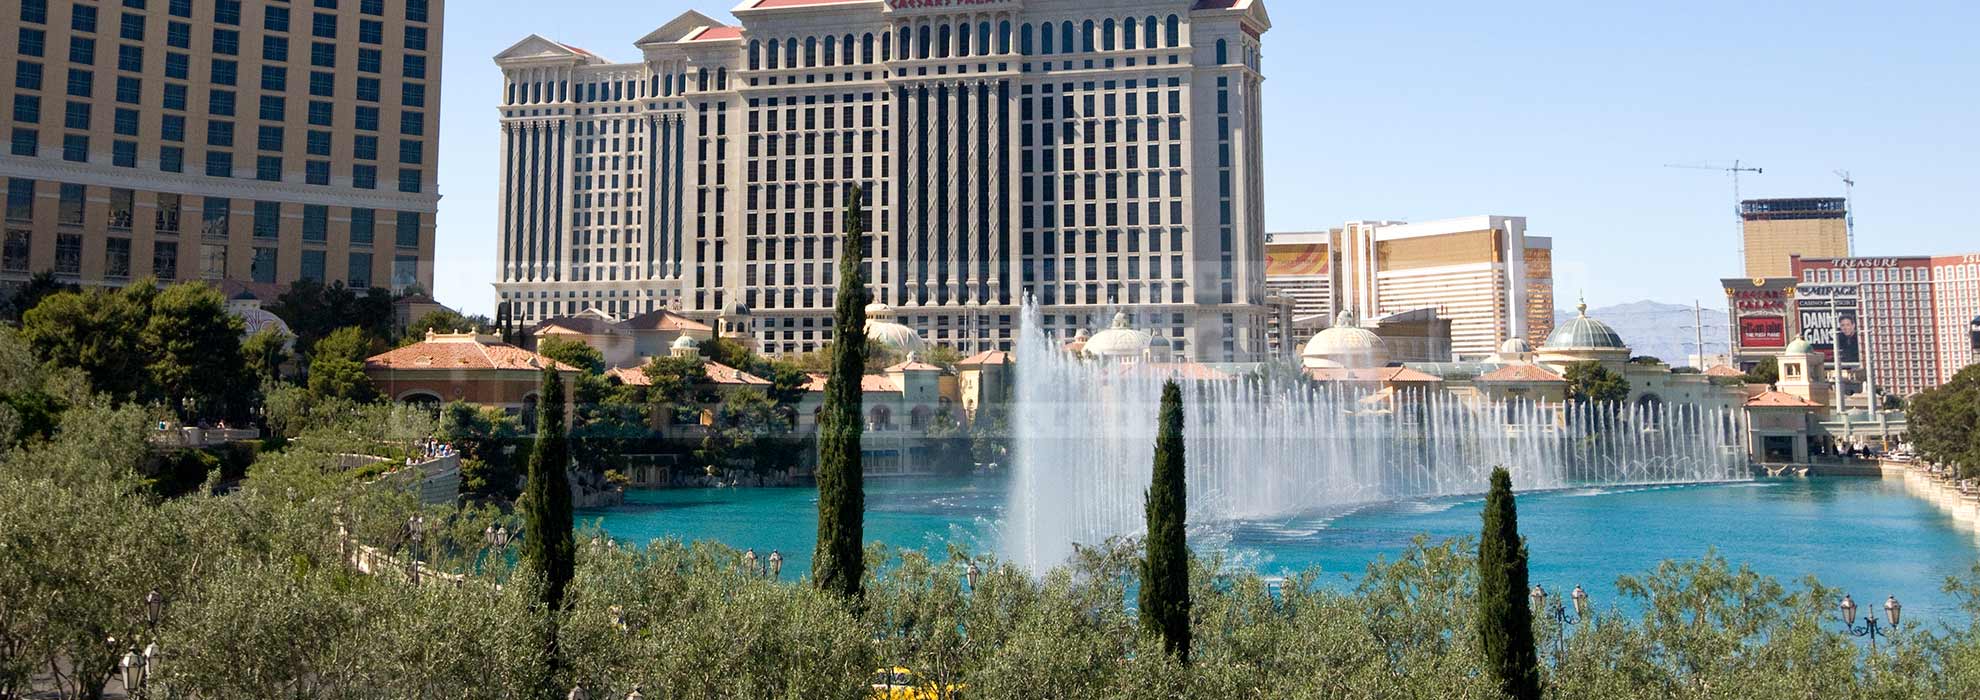 view of the large fountains near Bellagio hotel and casino